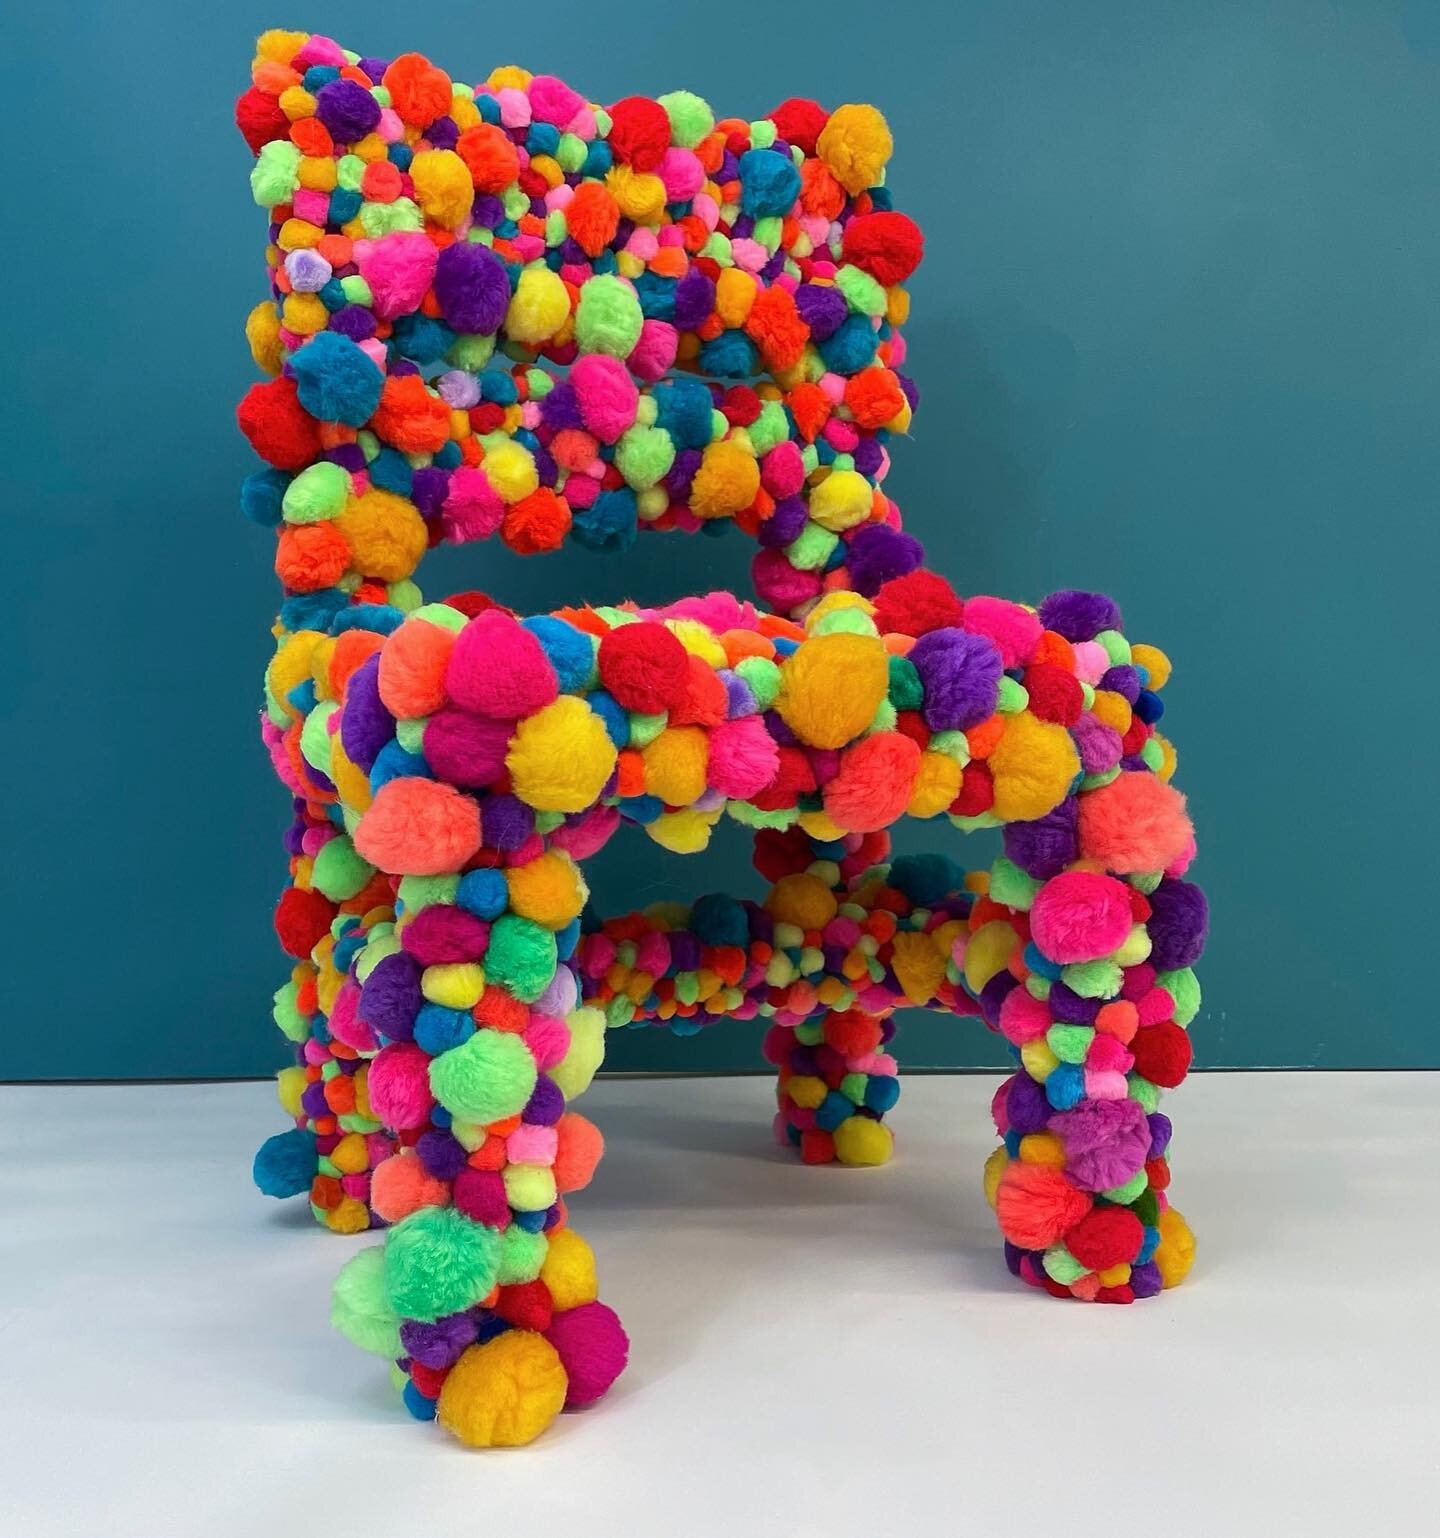 New Year.
New Thing.
&ldquo;Time Out Chair&rdquo;

Sort of makes you want to misbehave so you can sit in it.

#pompoms 
#pompomlove
#pompomsculpture
#joyspotting
#abstactart
#sculpture